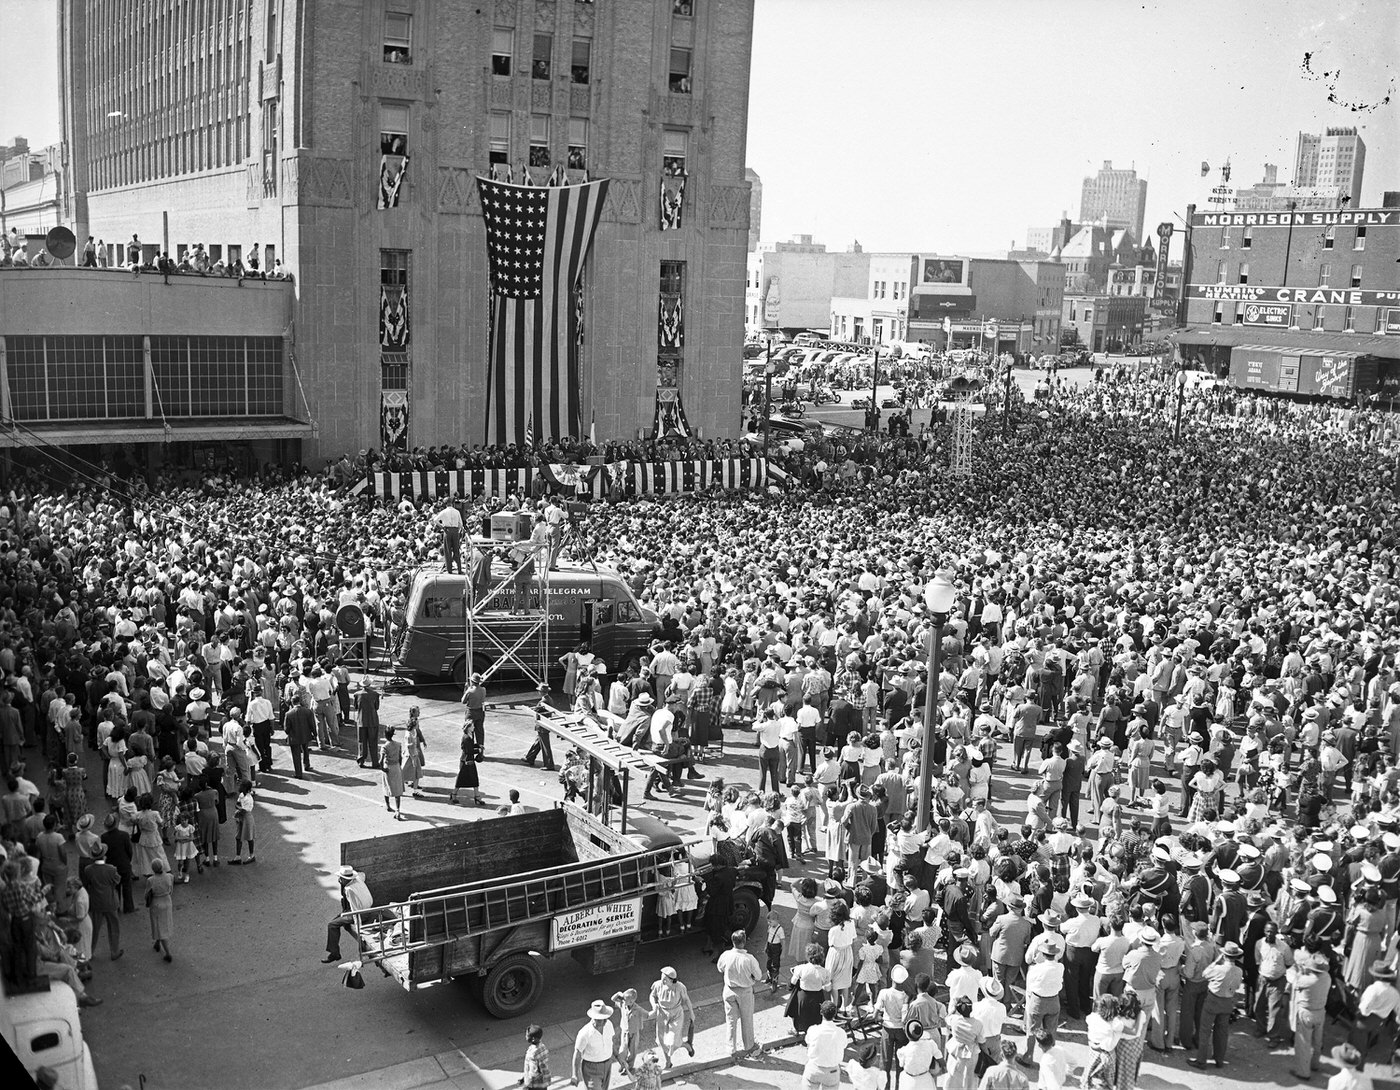 Crowd during President Truman's visit to Fort Worth, 1948